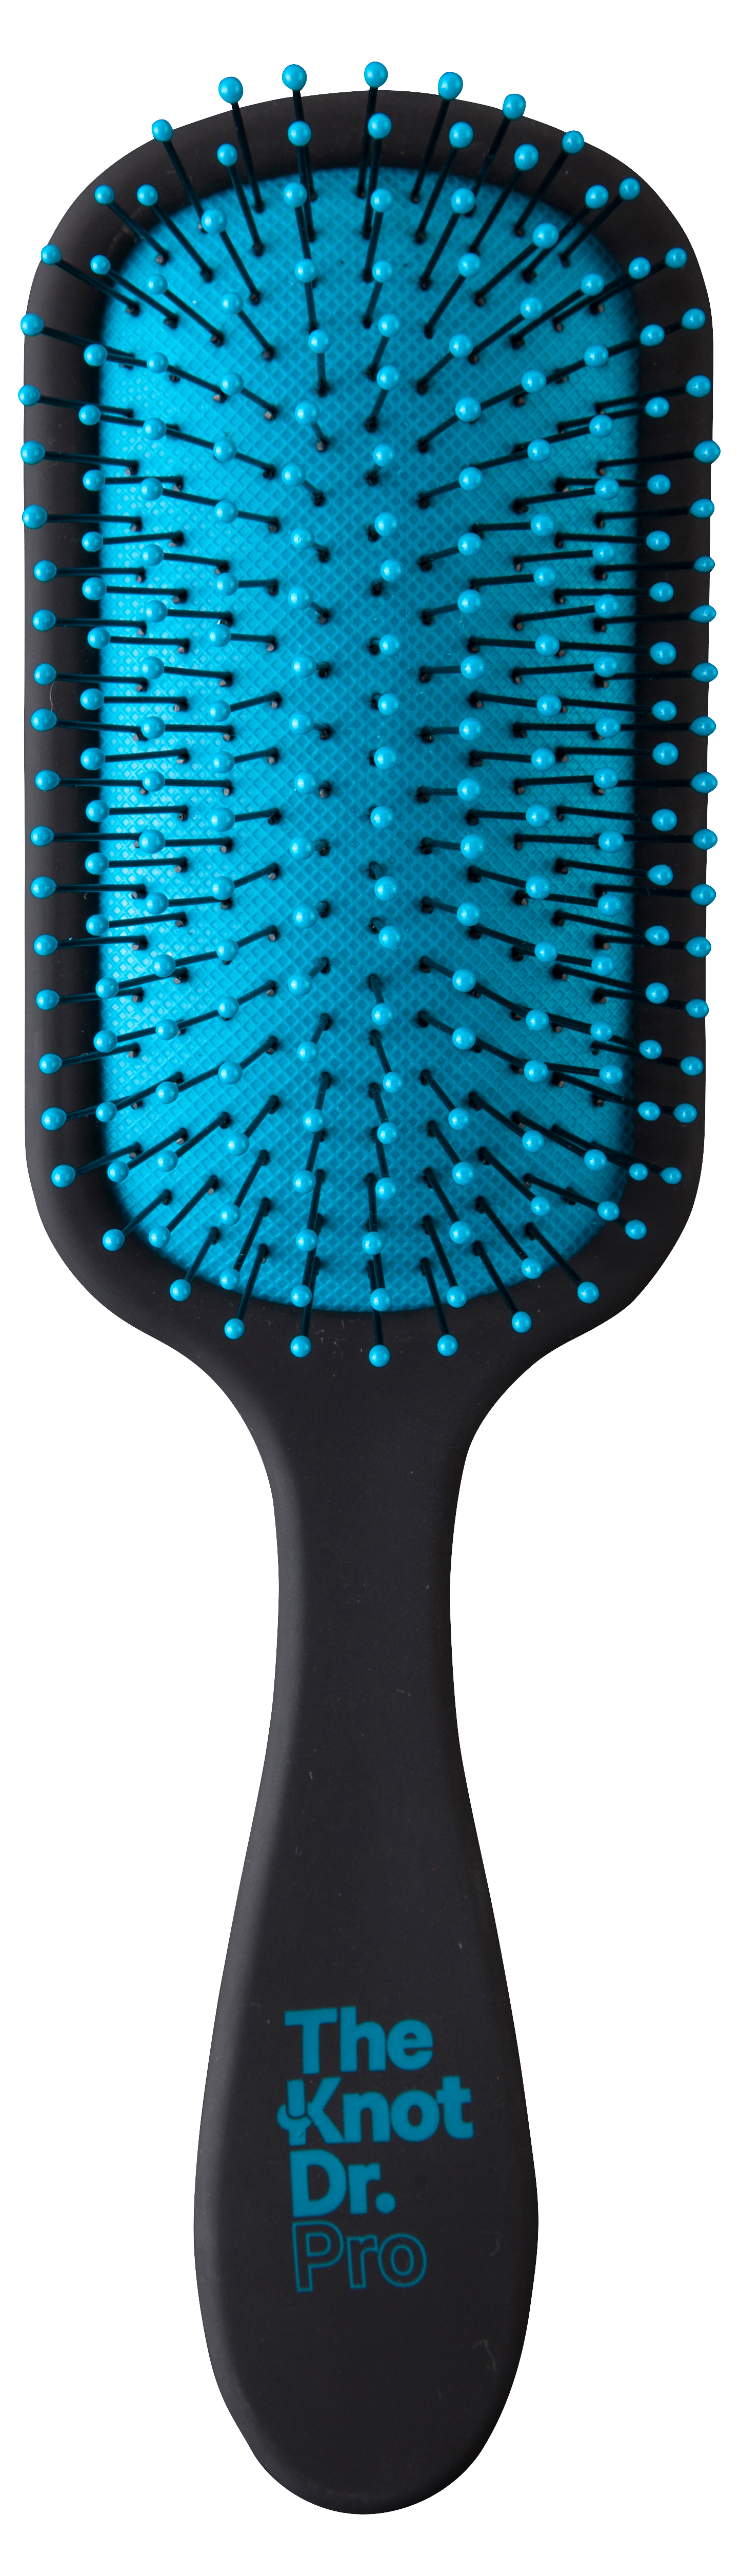 The Knot Dr. - The Pro Brush - Marine